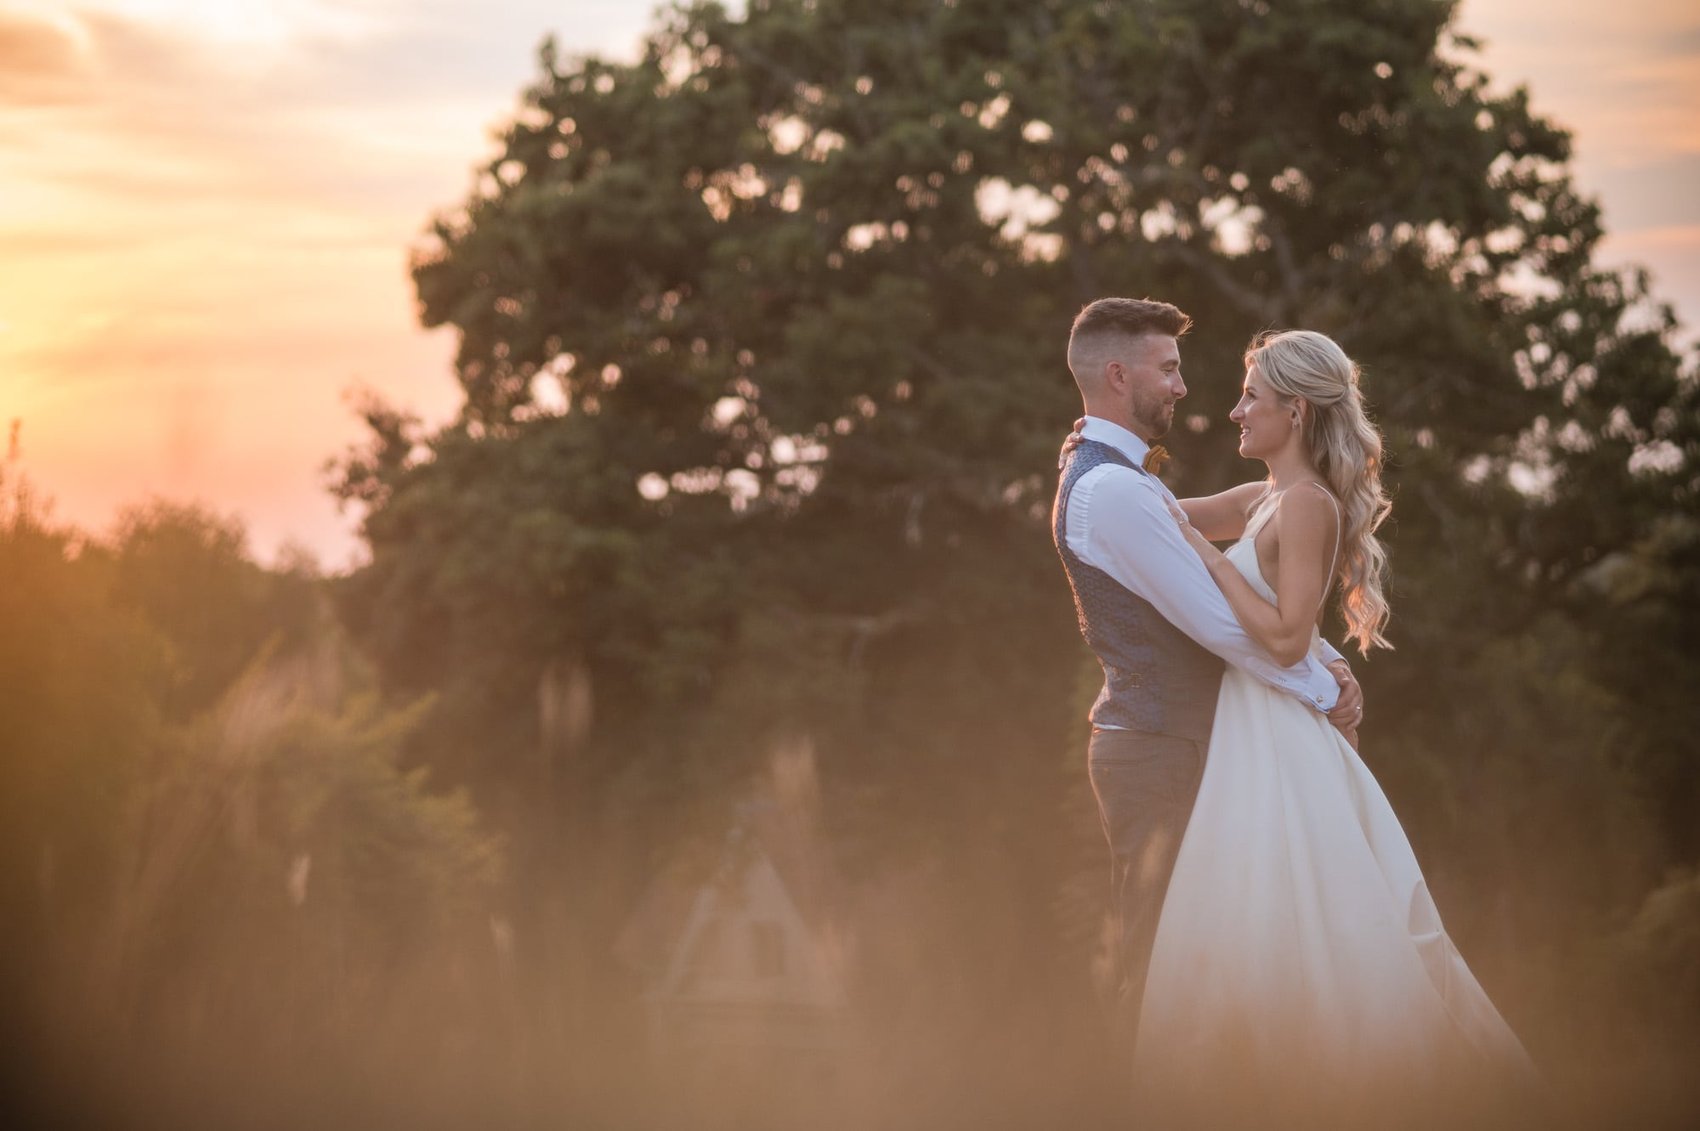 Sunset at Hale park House wedding with bride and groom long grass